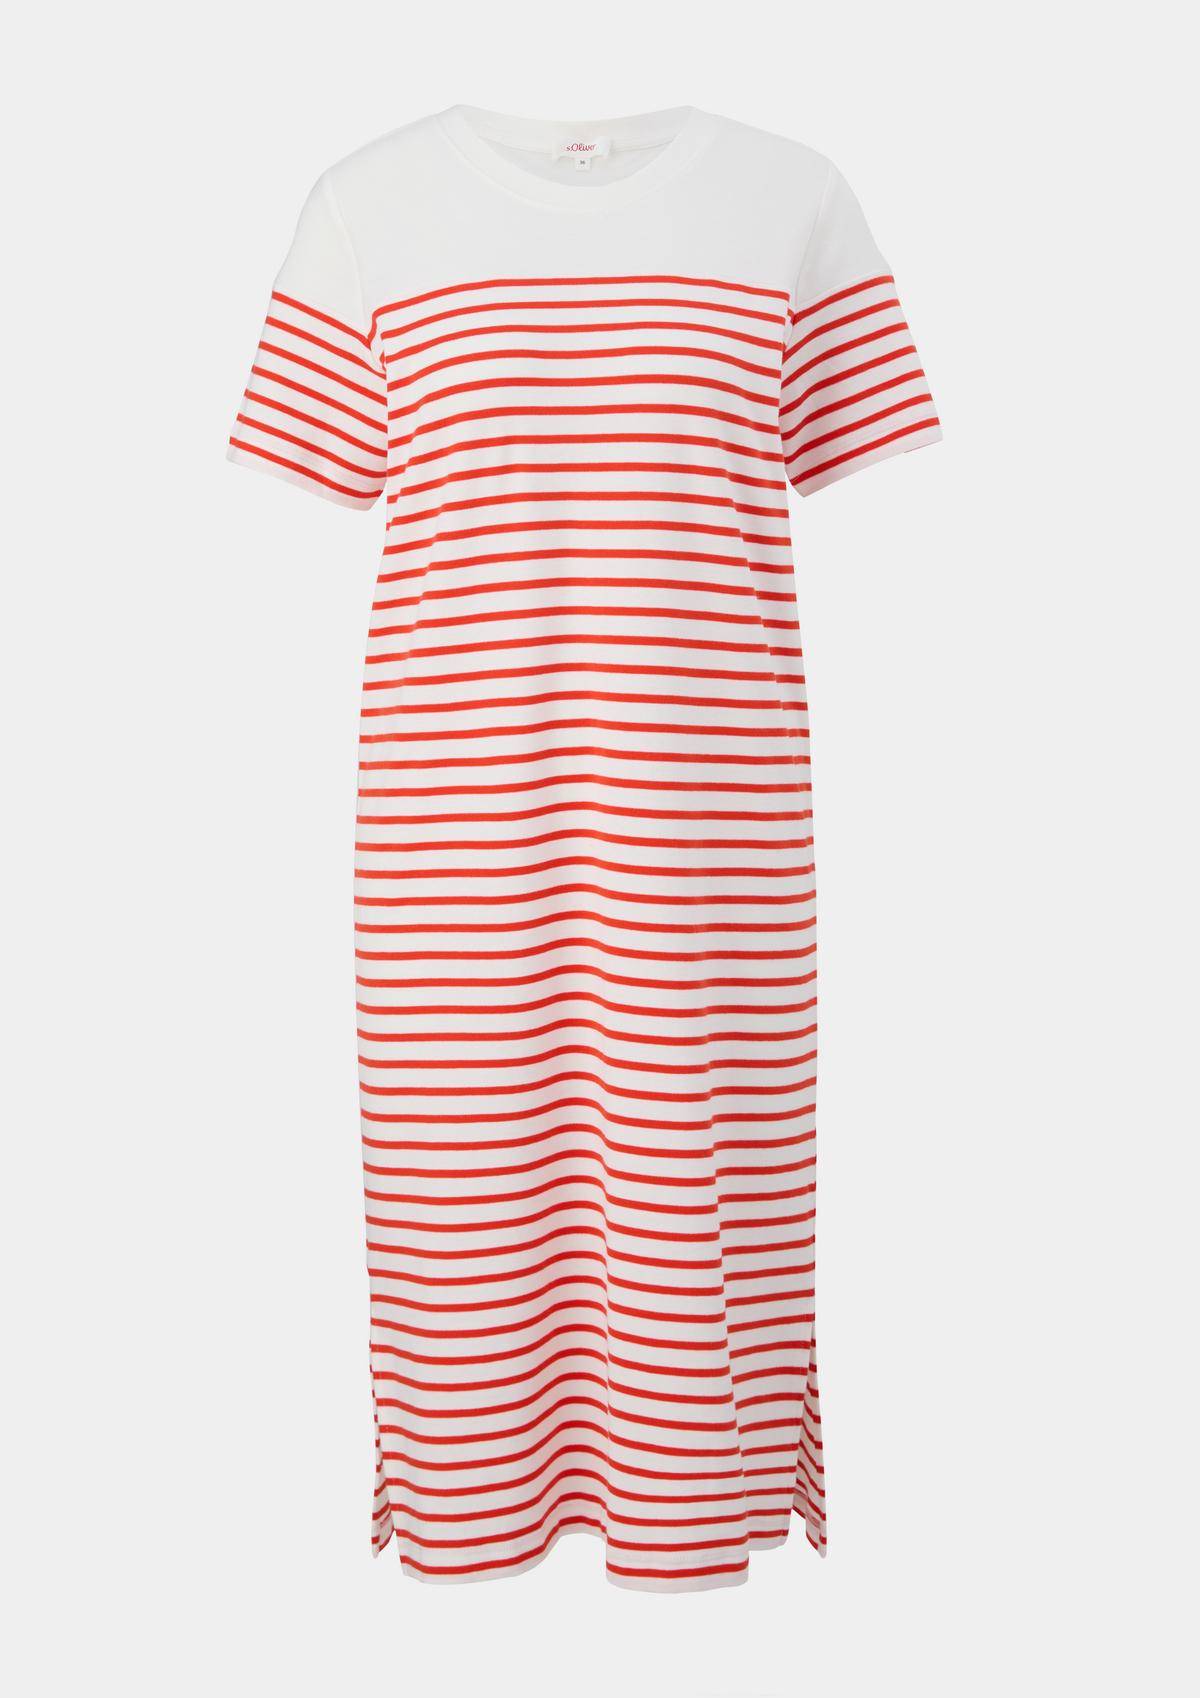 s.Oliver T-shirt dress made of pure cotton